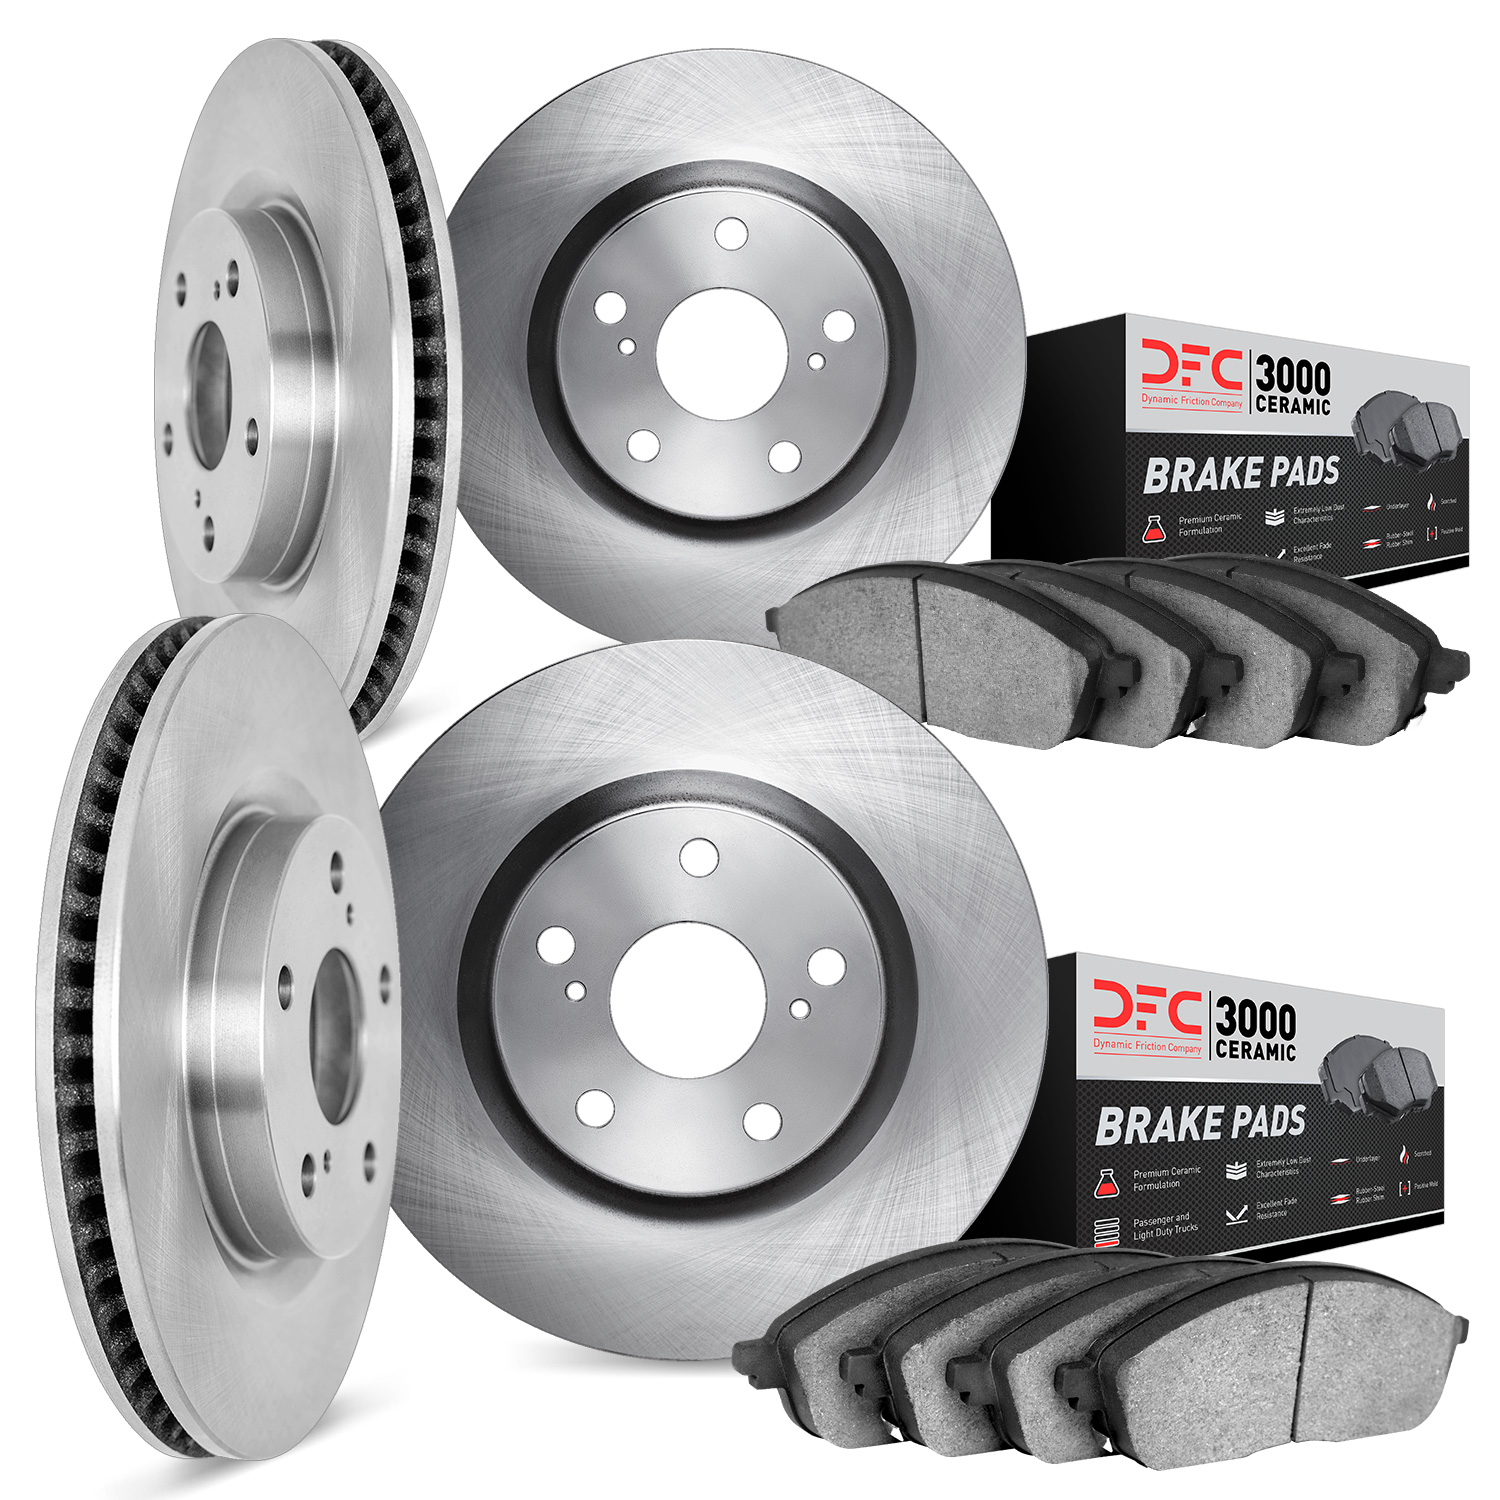 6304-42025 Brake Rotors with 3000-Series Ceramic Brake Pads Kit, Fits Select Mopar, Position: Front and Rear